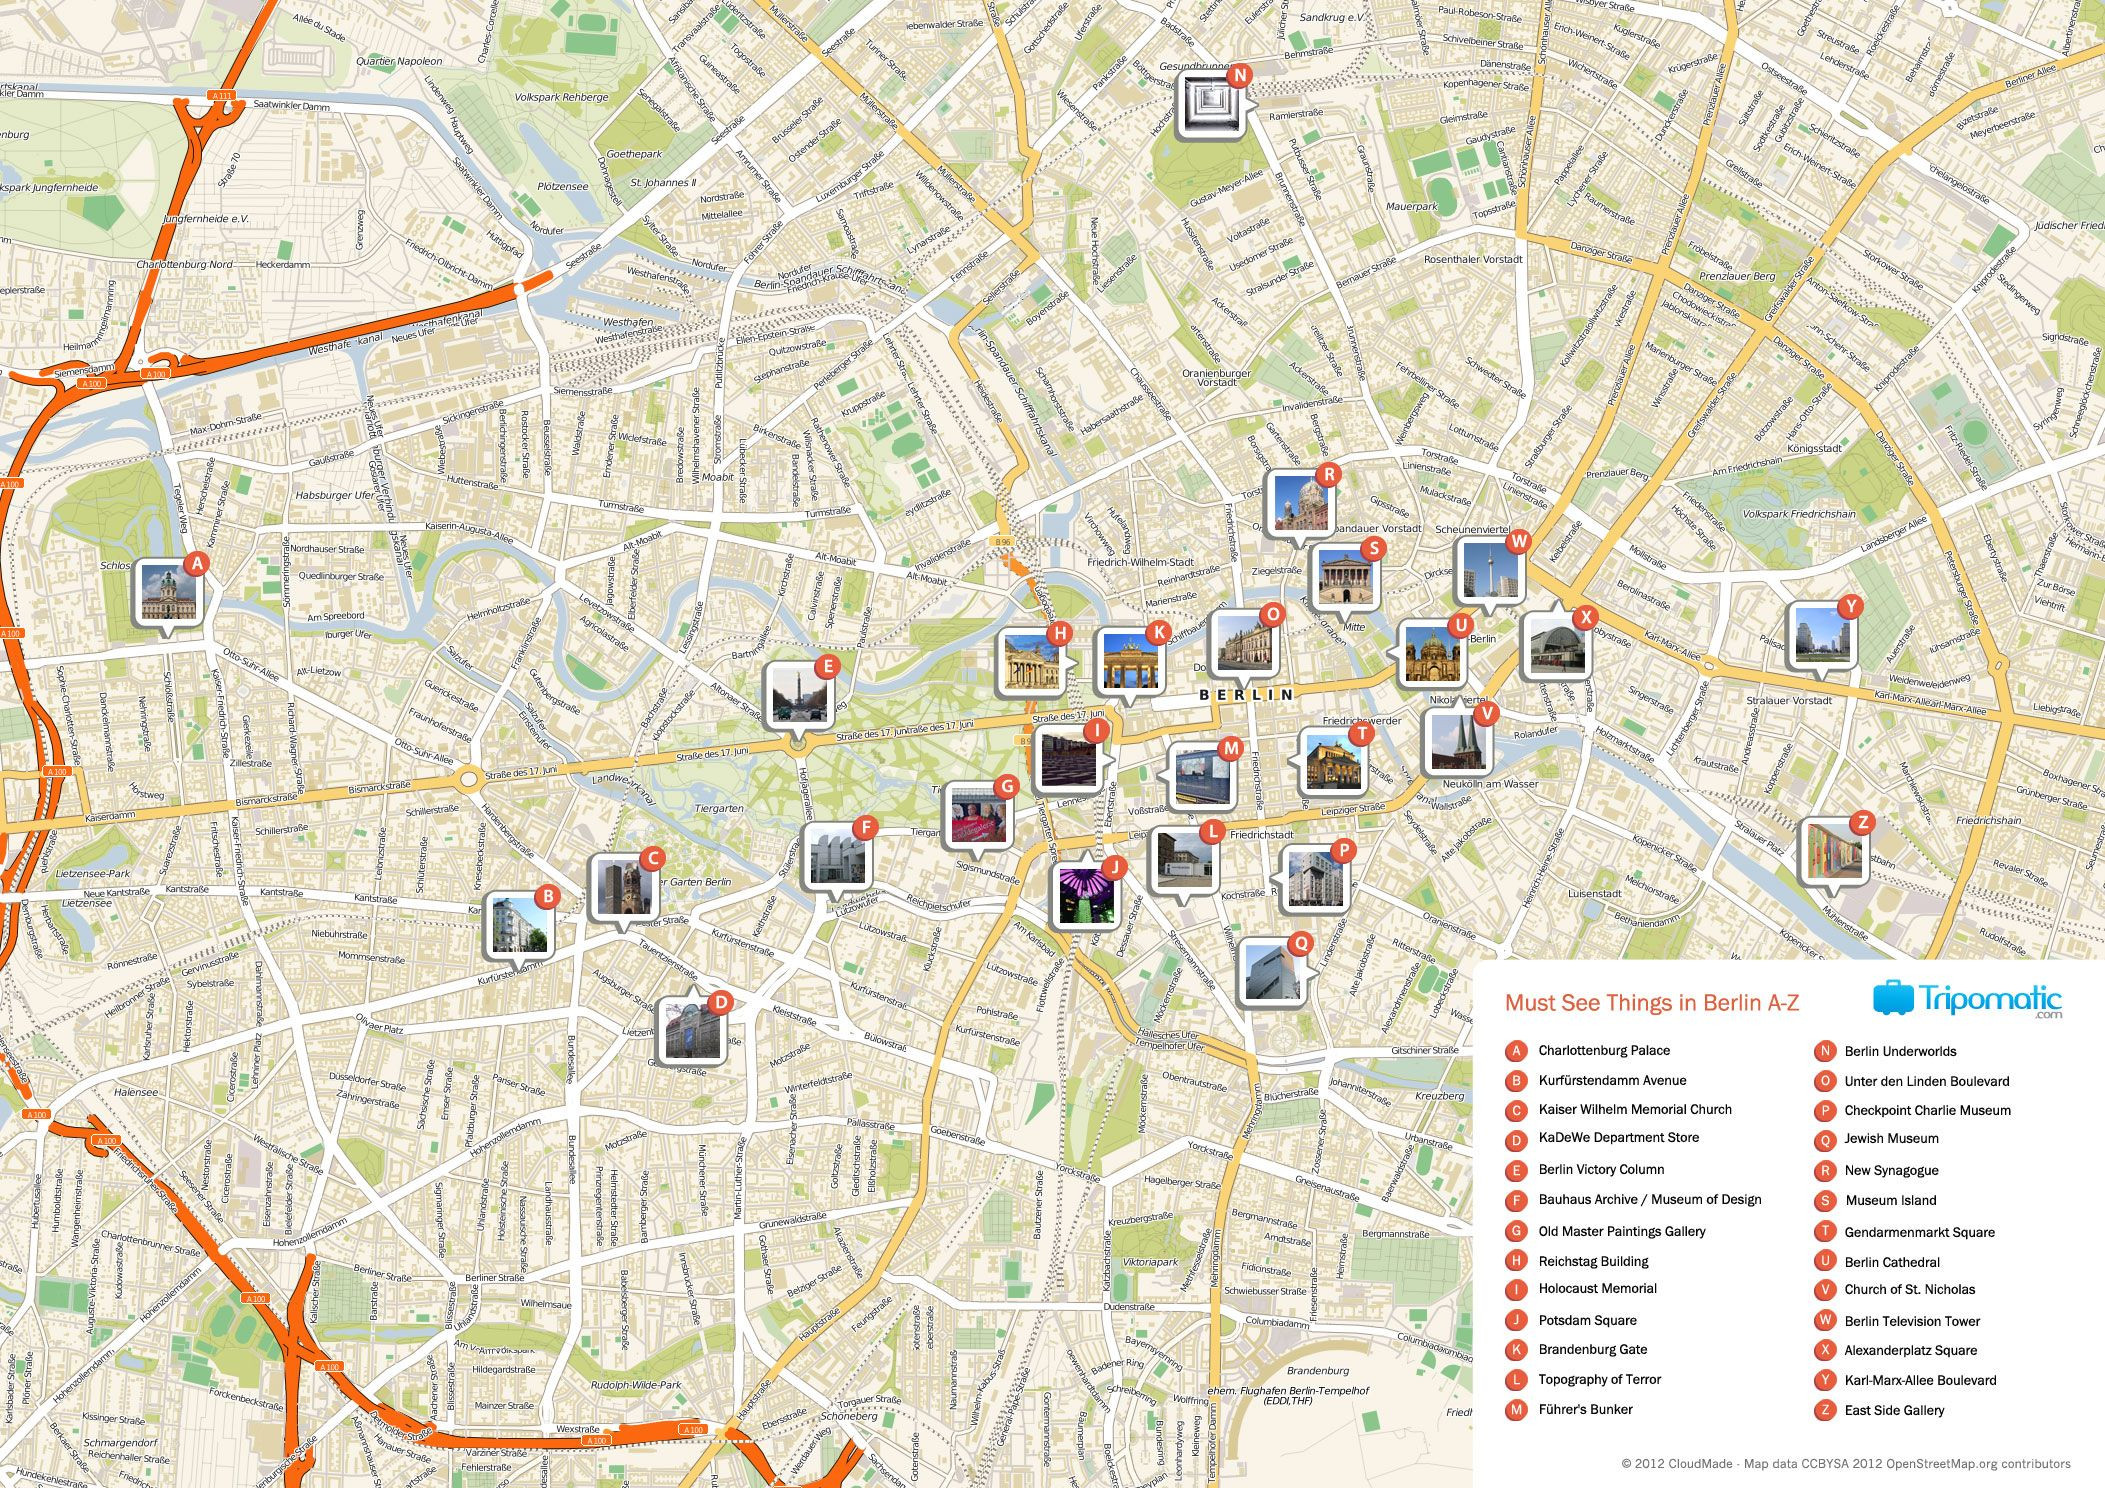 Map of Berlin tourist sights and attractions from Tripomatic